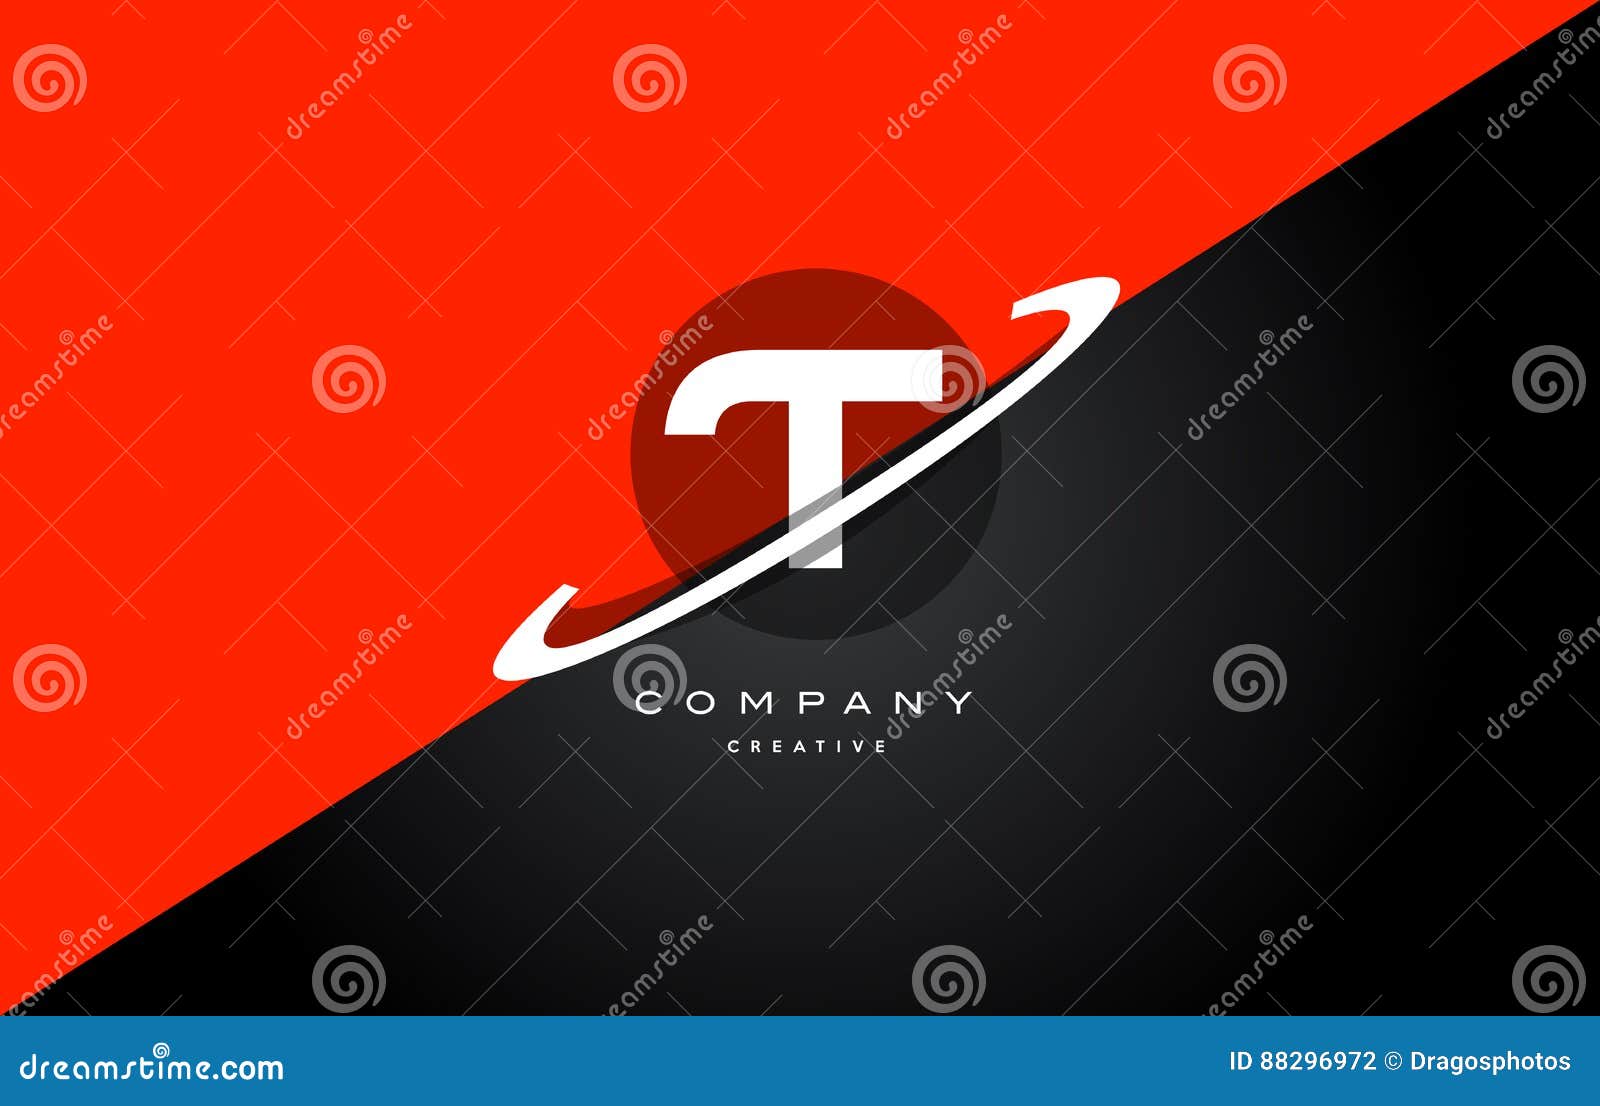 T Red Black Technology Alphabet Company Letter Logo Icon Stock Vector ...